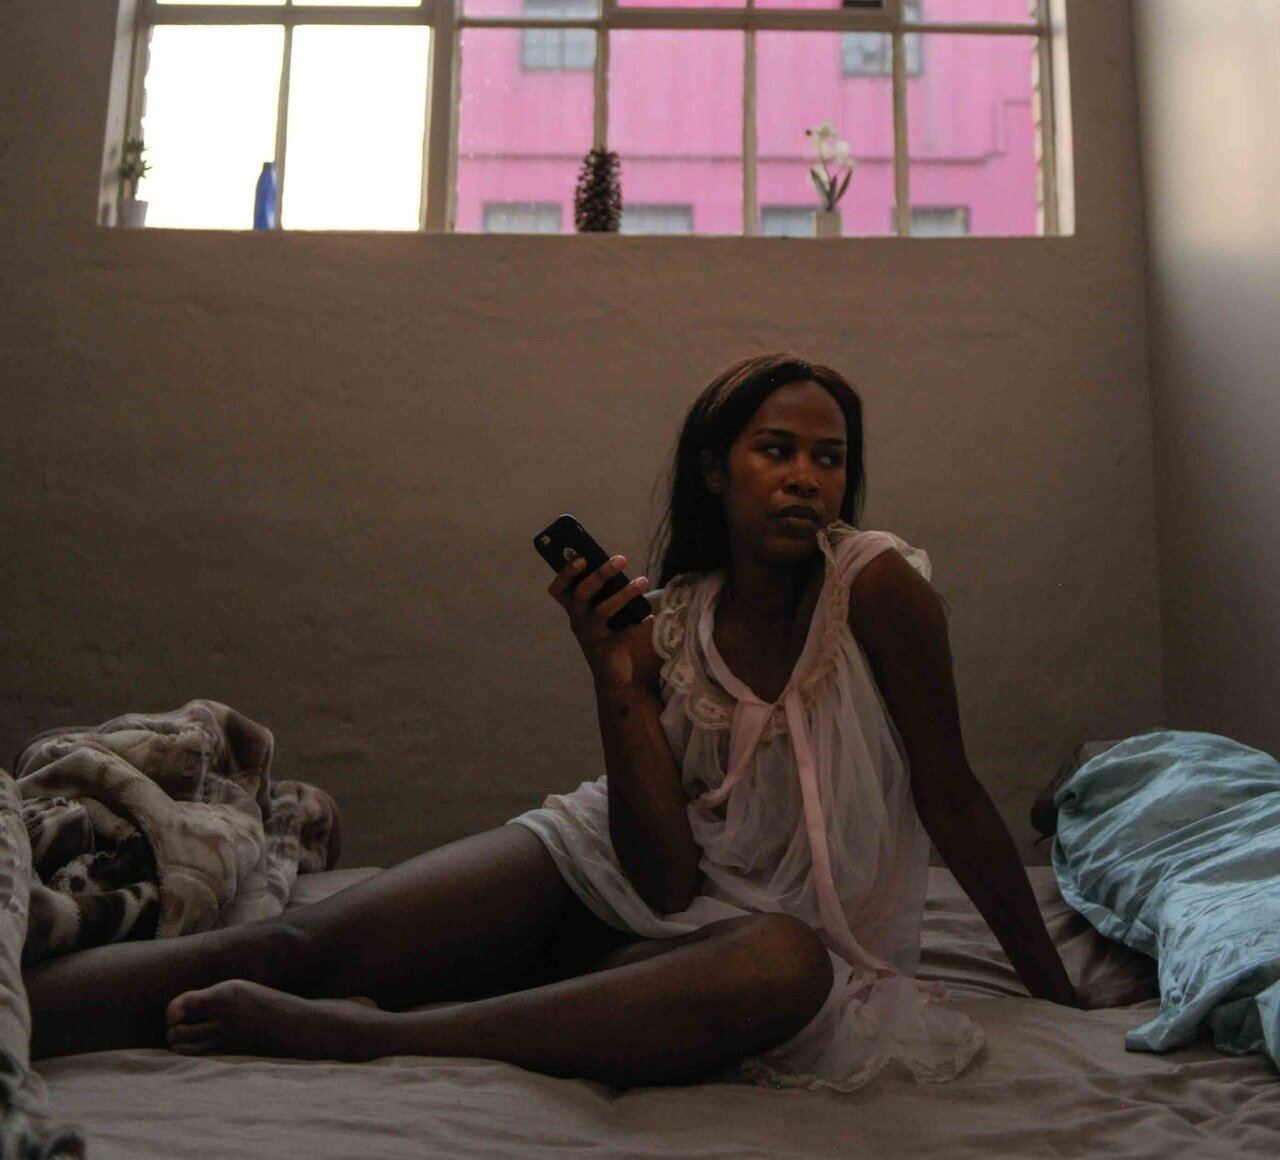  [Image description: A Black woman wearing a pink nightgown sits upright on a bed. She holds a cellphone in her left hand. The sheets of the bed are scrunched at her feet. Through the window above is a pink building in the background. ] 